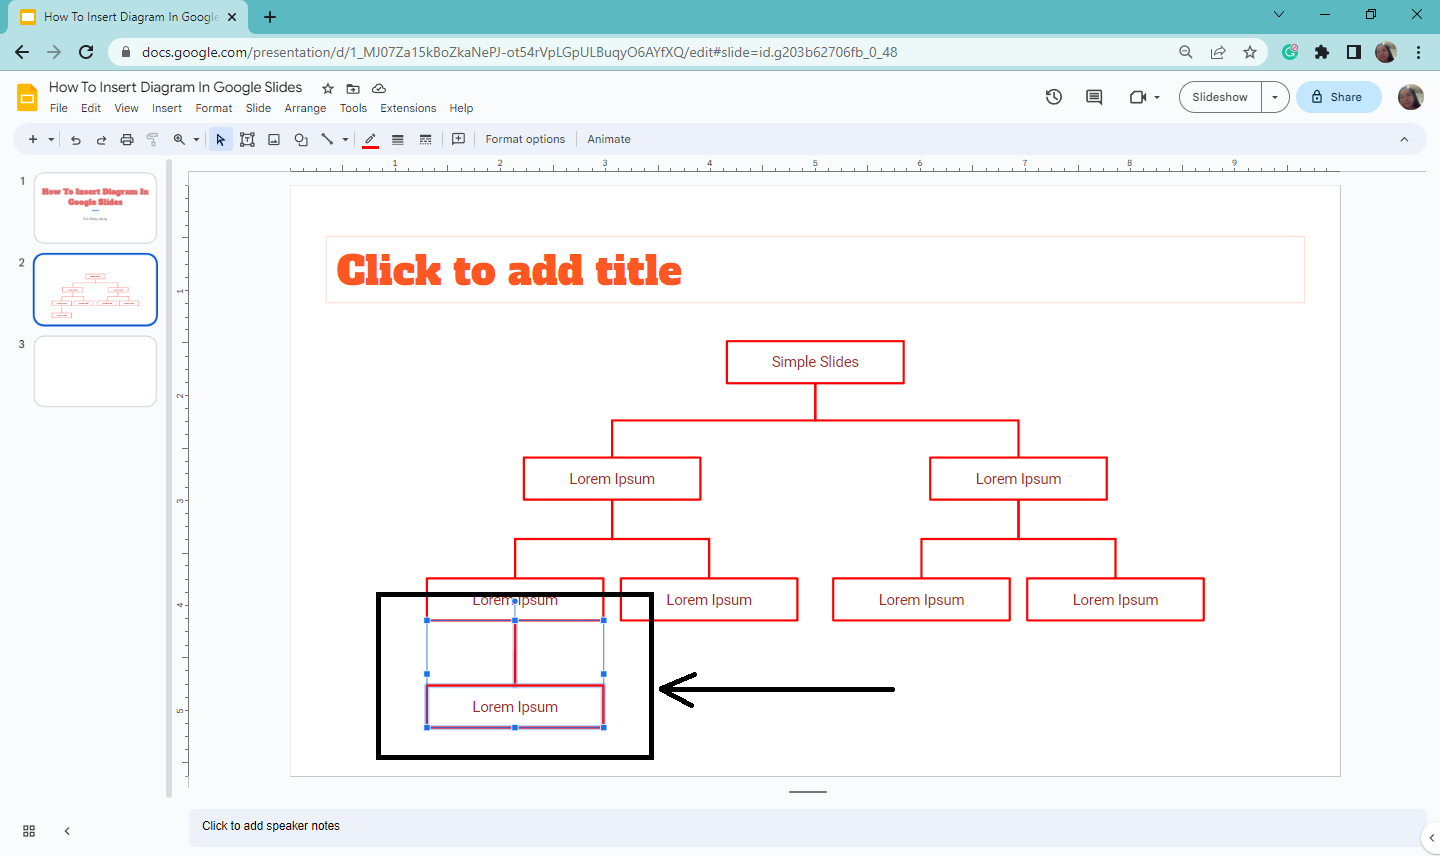 Arrange the text box and connector once its been added to your Google slide.